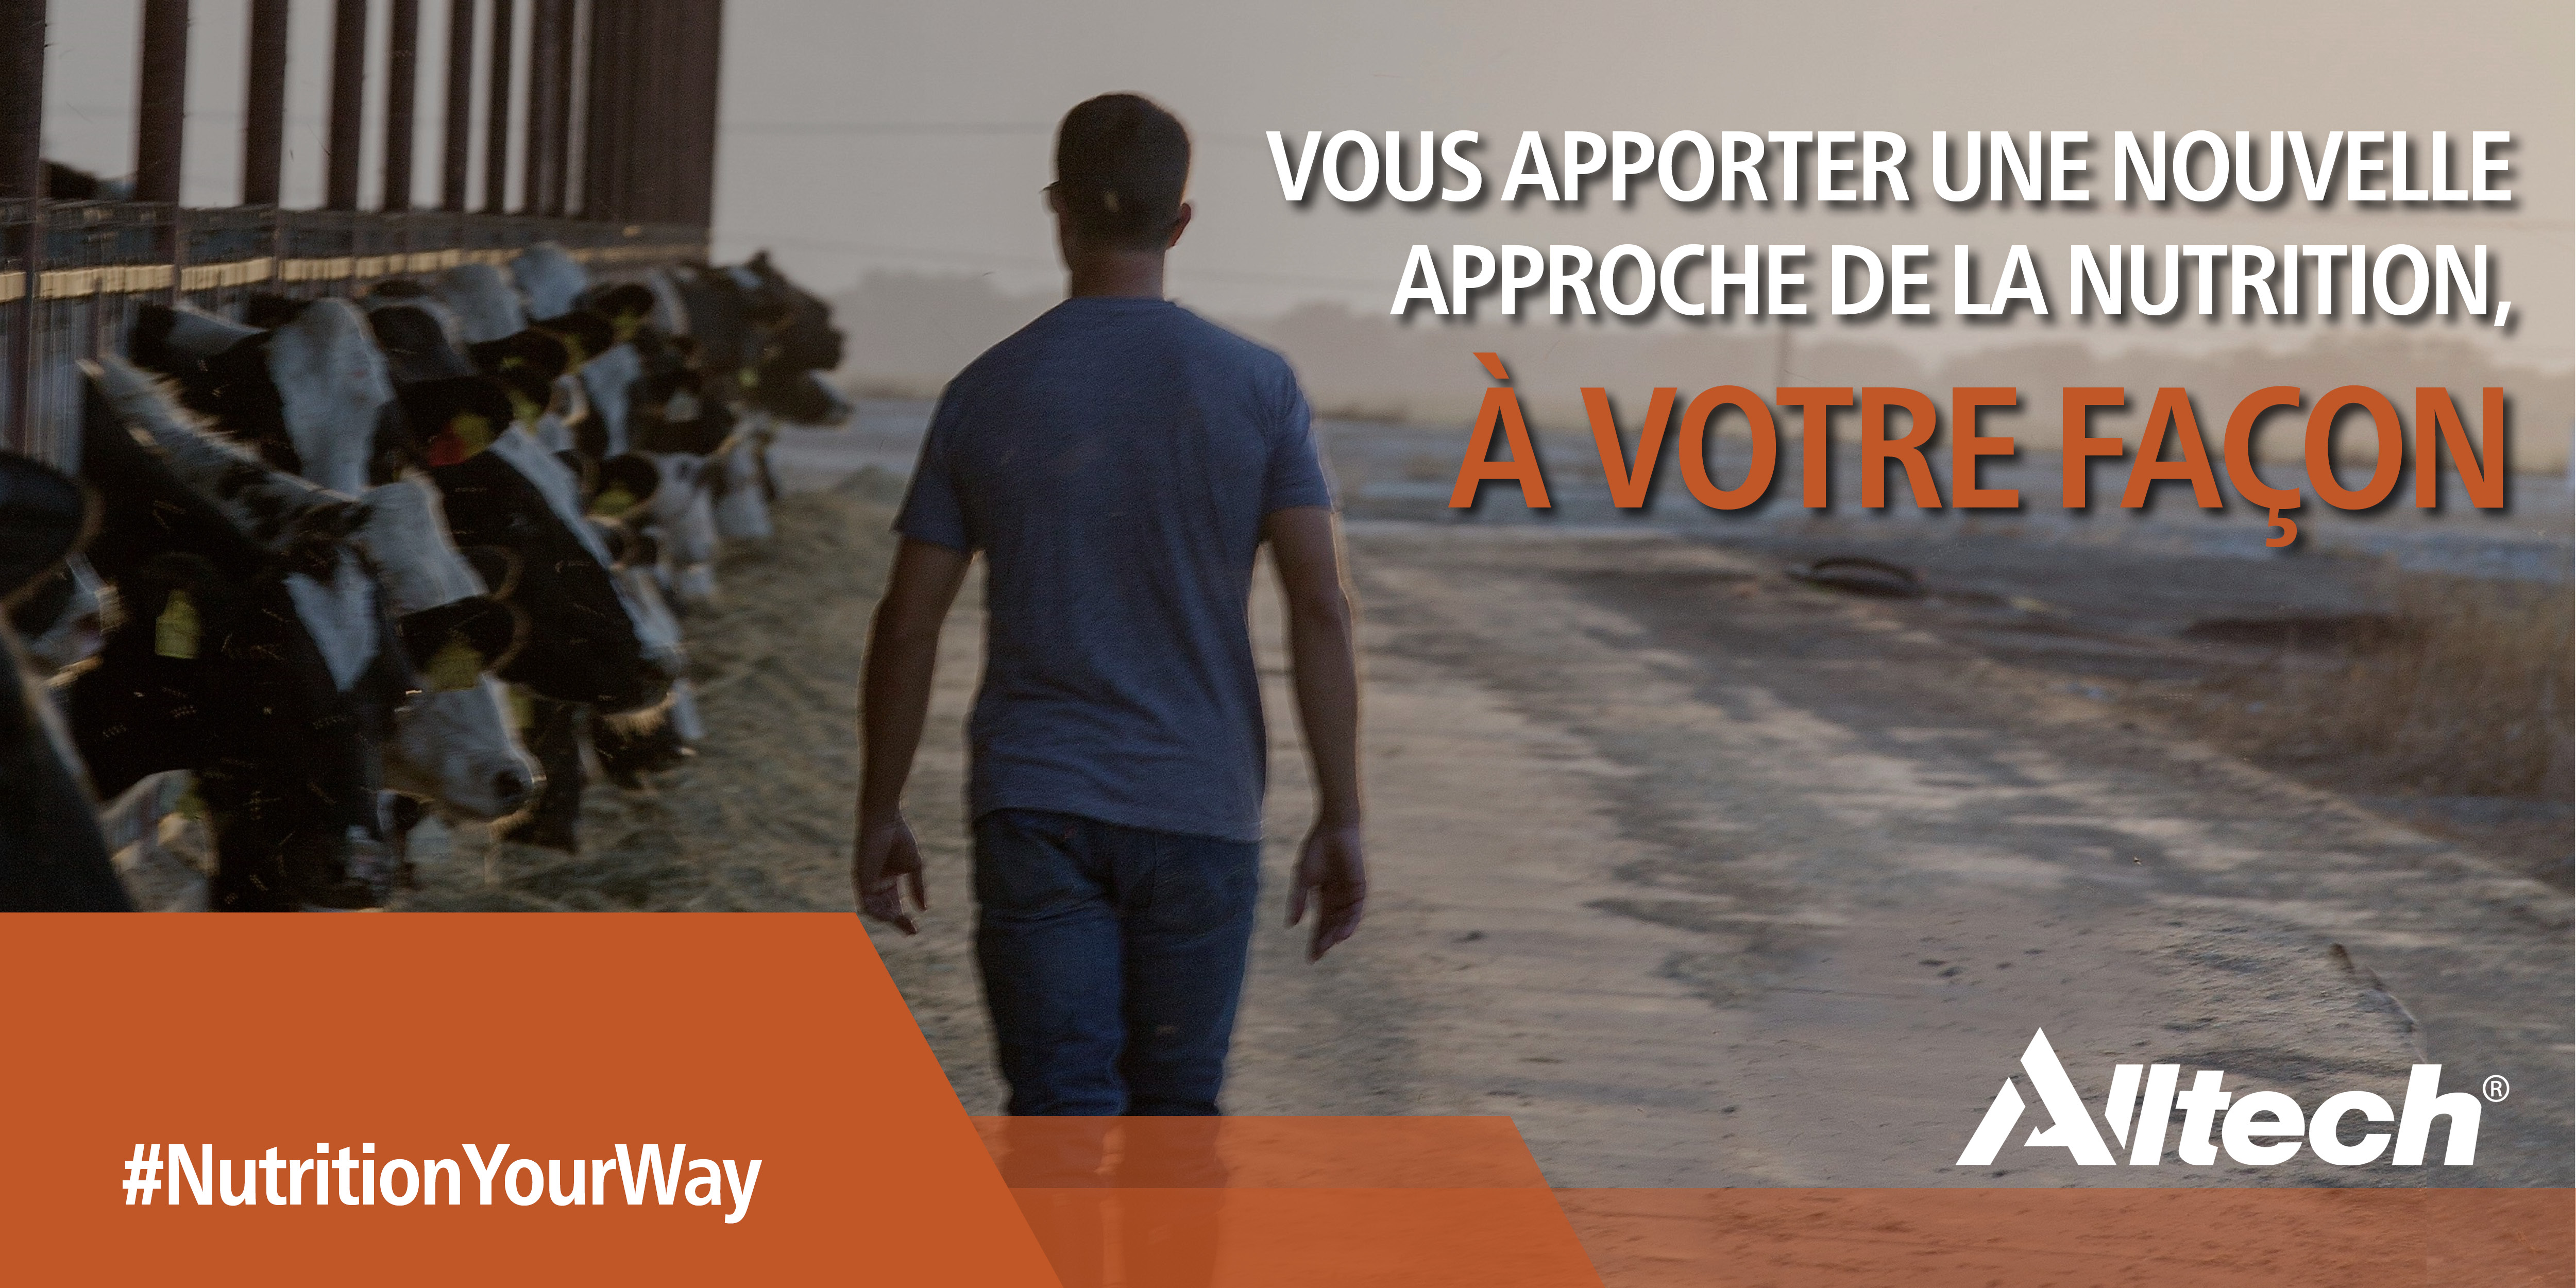 7051_Nutrition Your Way - Hubspot header FRENCH without wheel.jpg